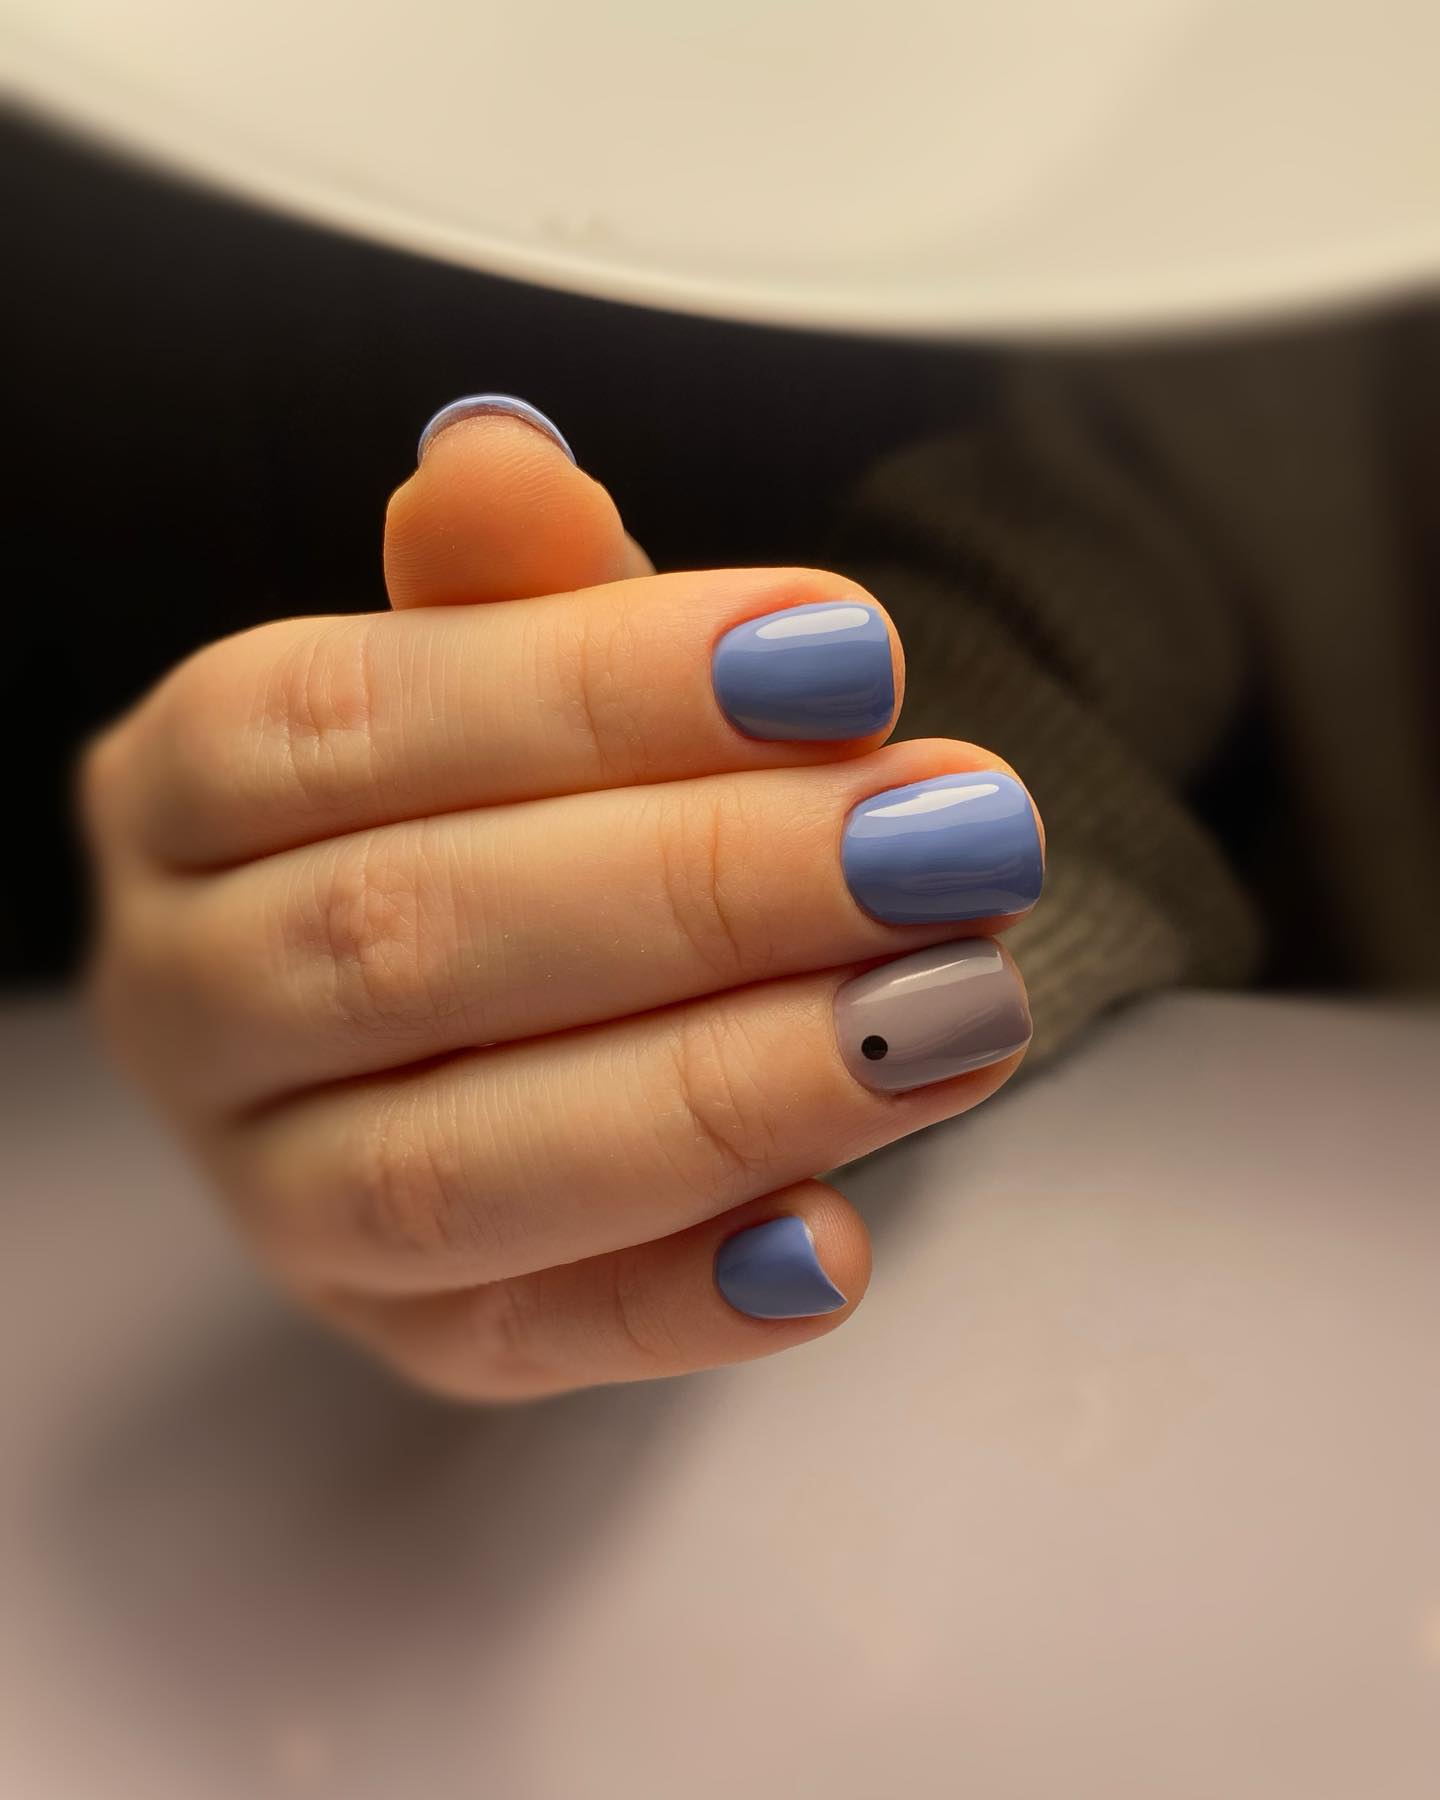 Preppy Blue Nails: Channeling the School Uniform Vibe with a Touch of Blue